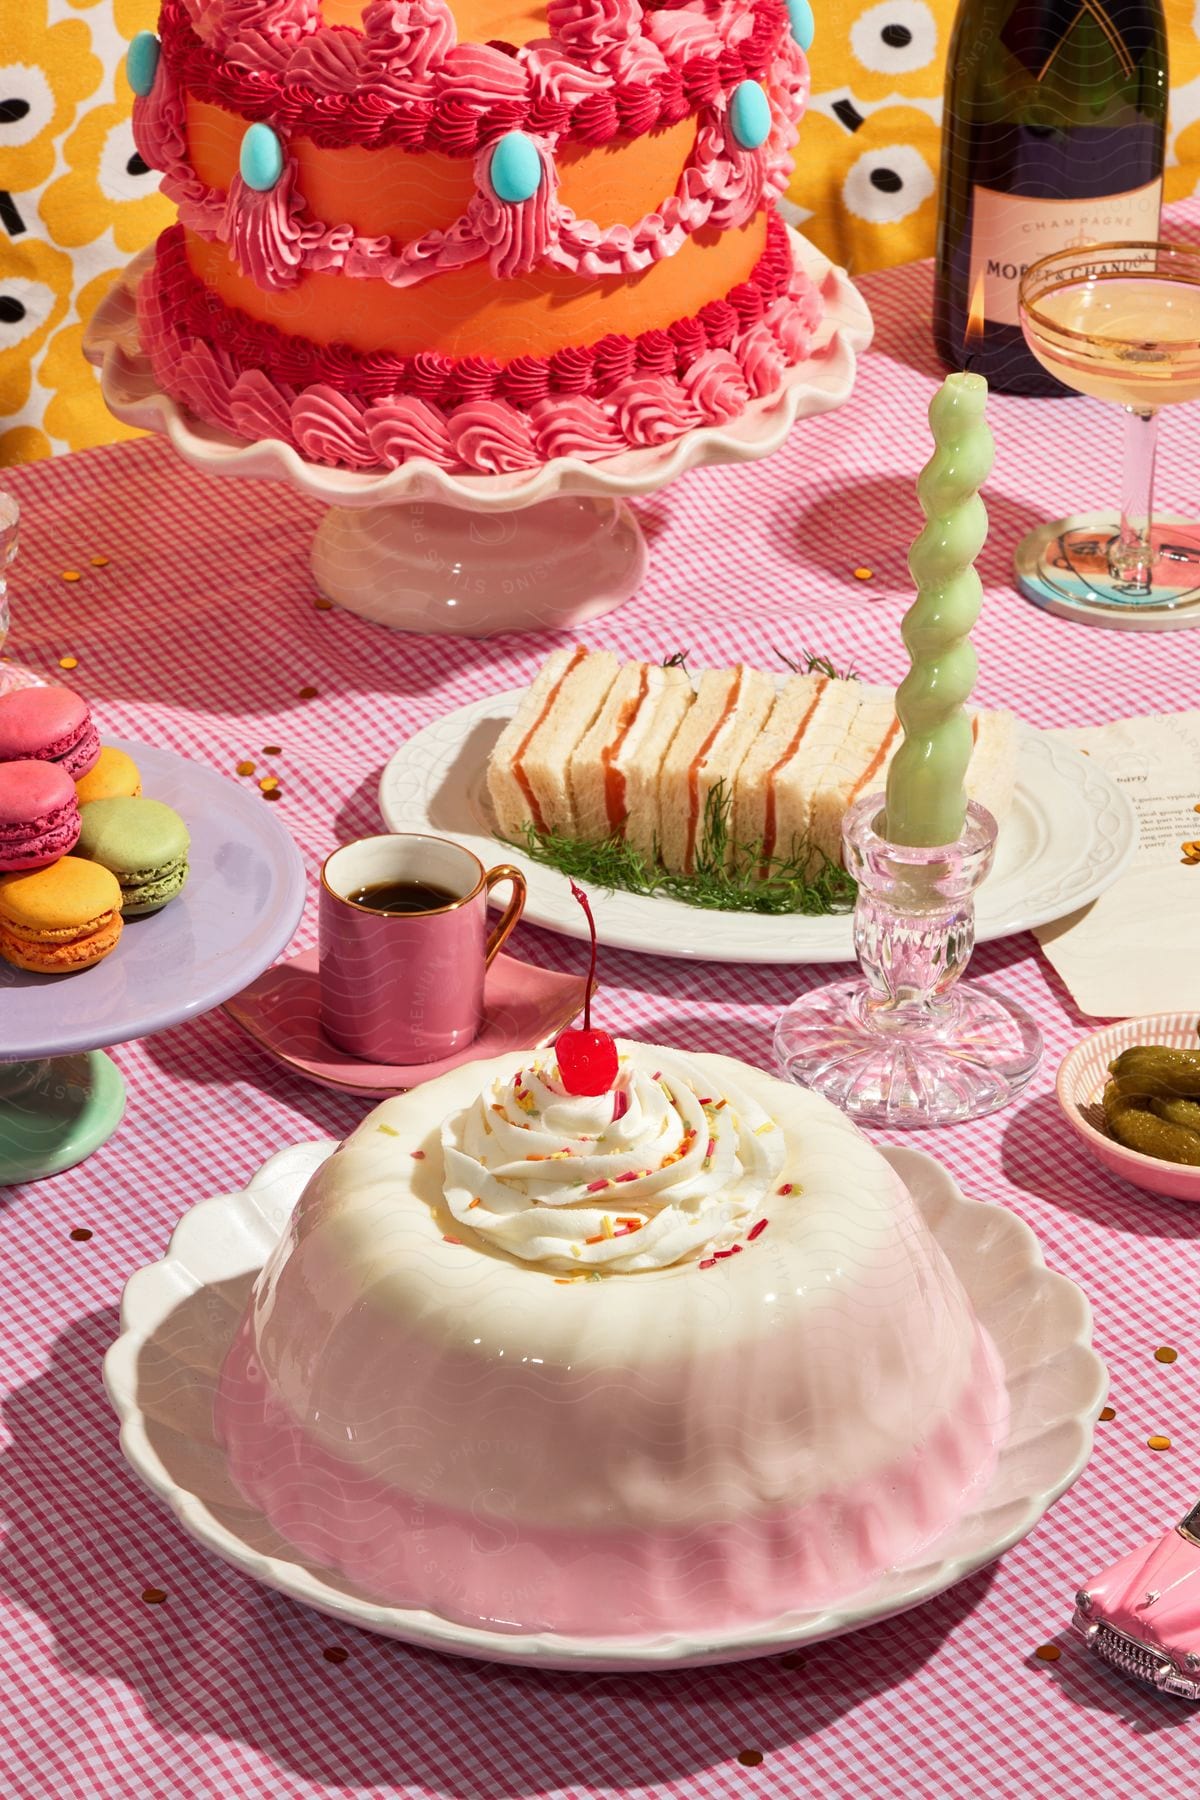 Stock photo of a set table with a birthday cake, white pudding, macaroons, finger sandwiches, coffee and white wine.